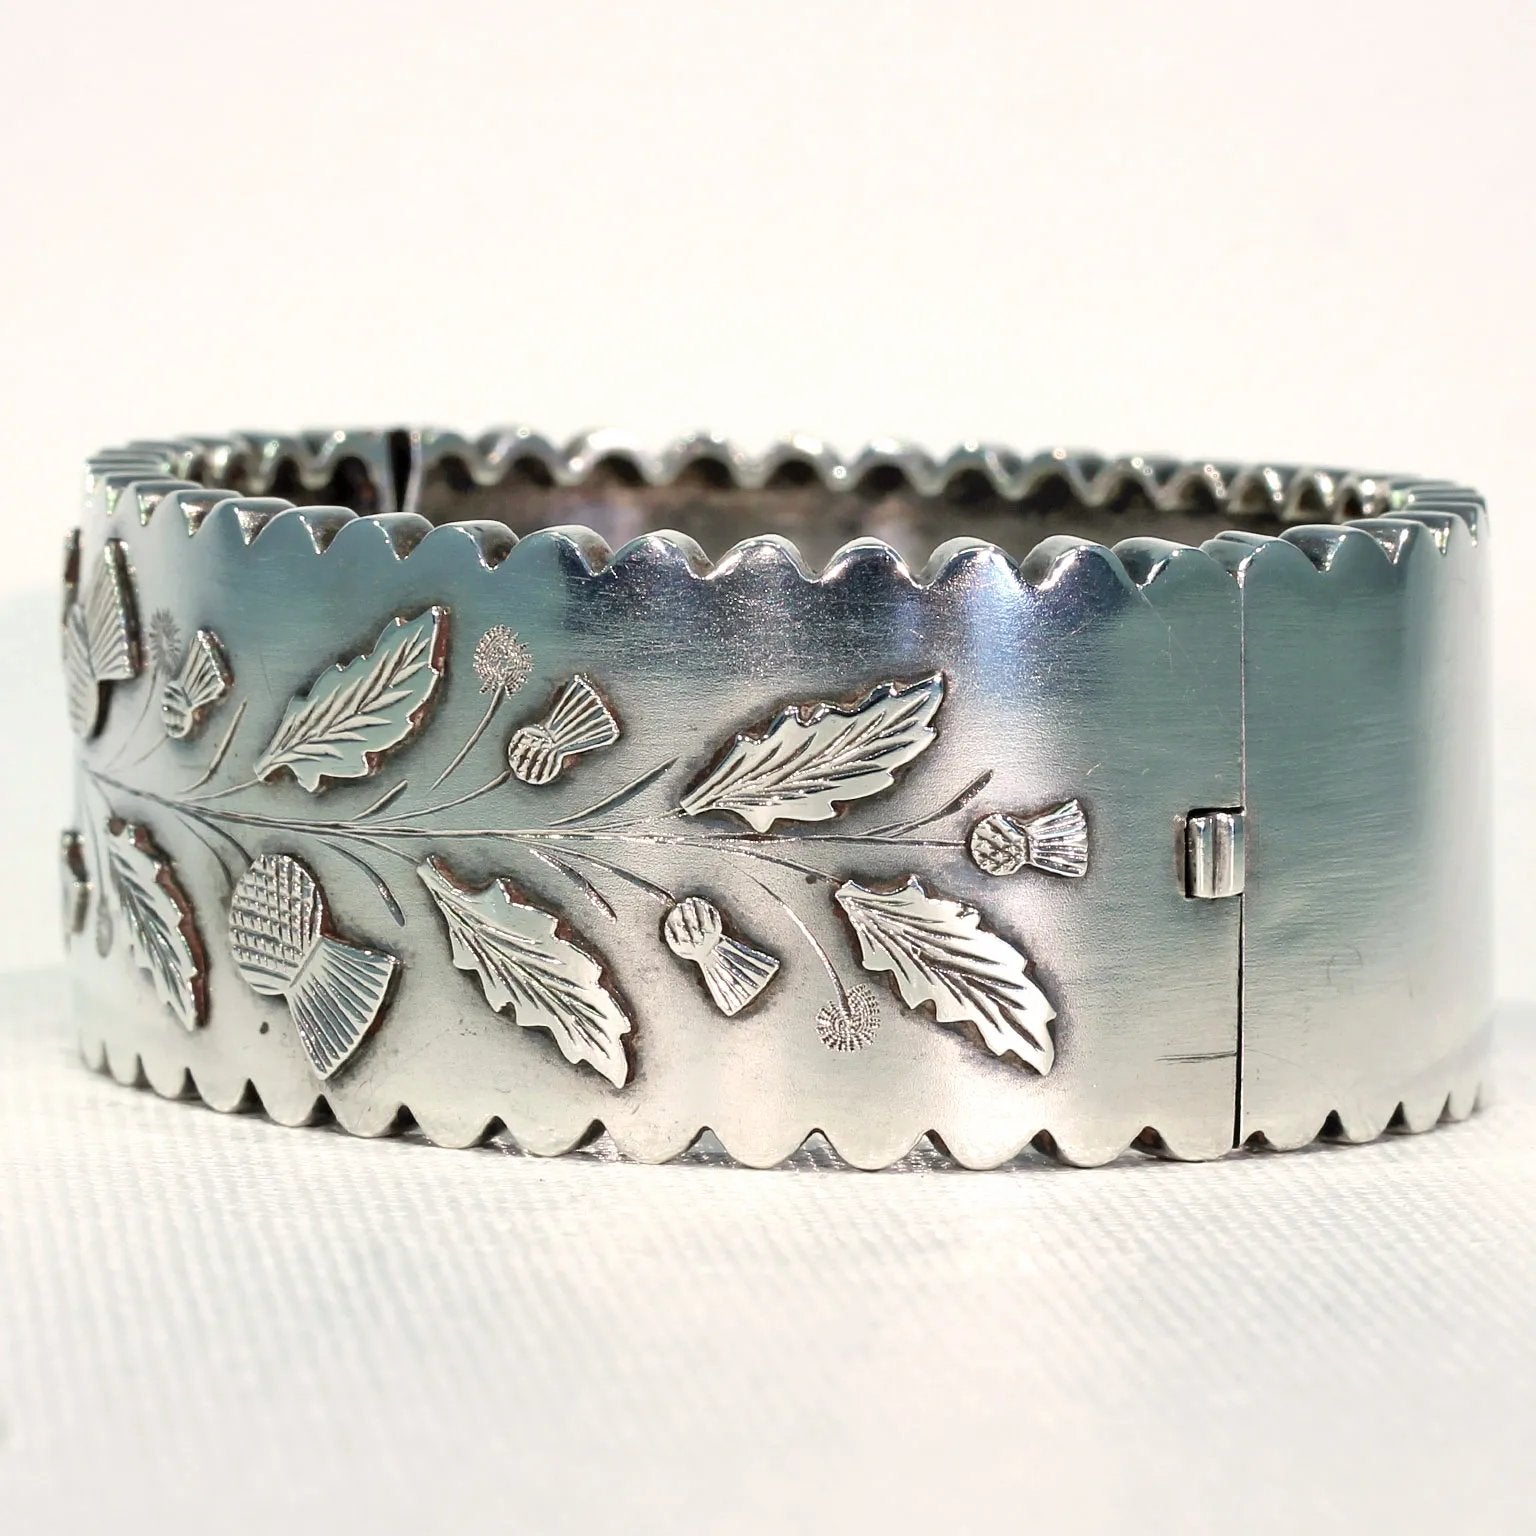 Antique Victorian Embossed Silver Bangle, Thistles & Leaves